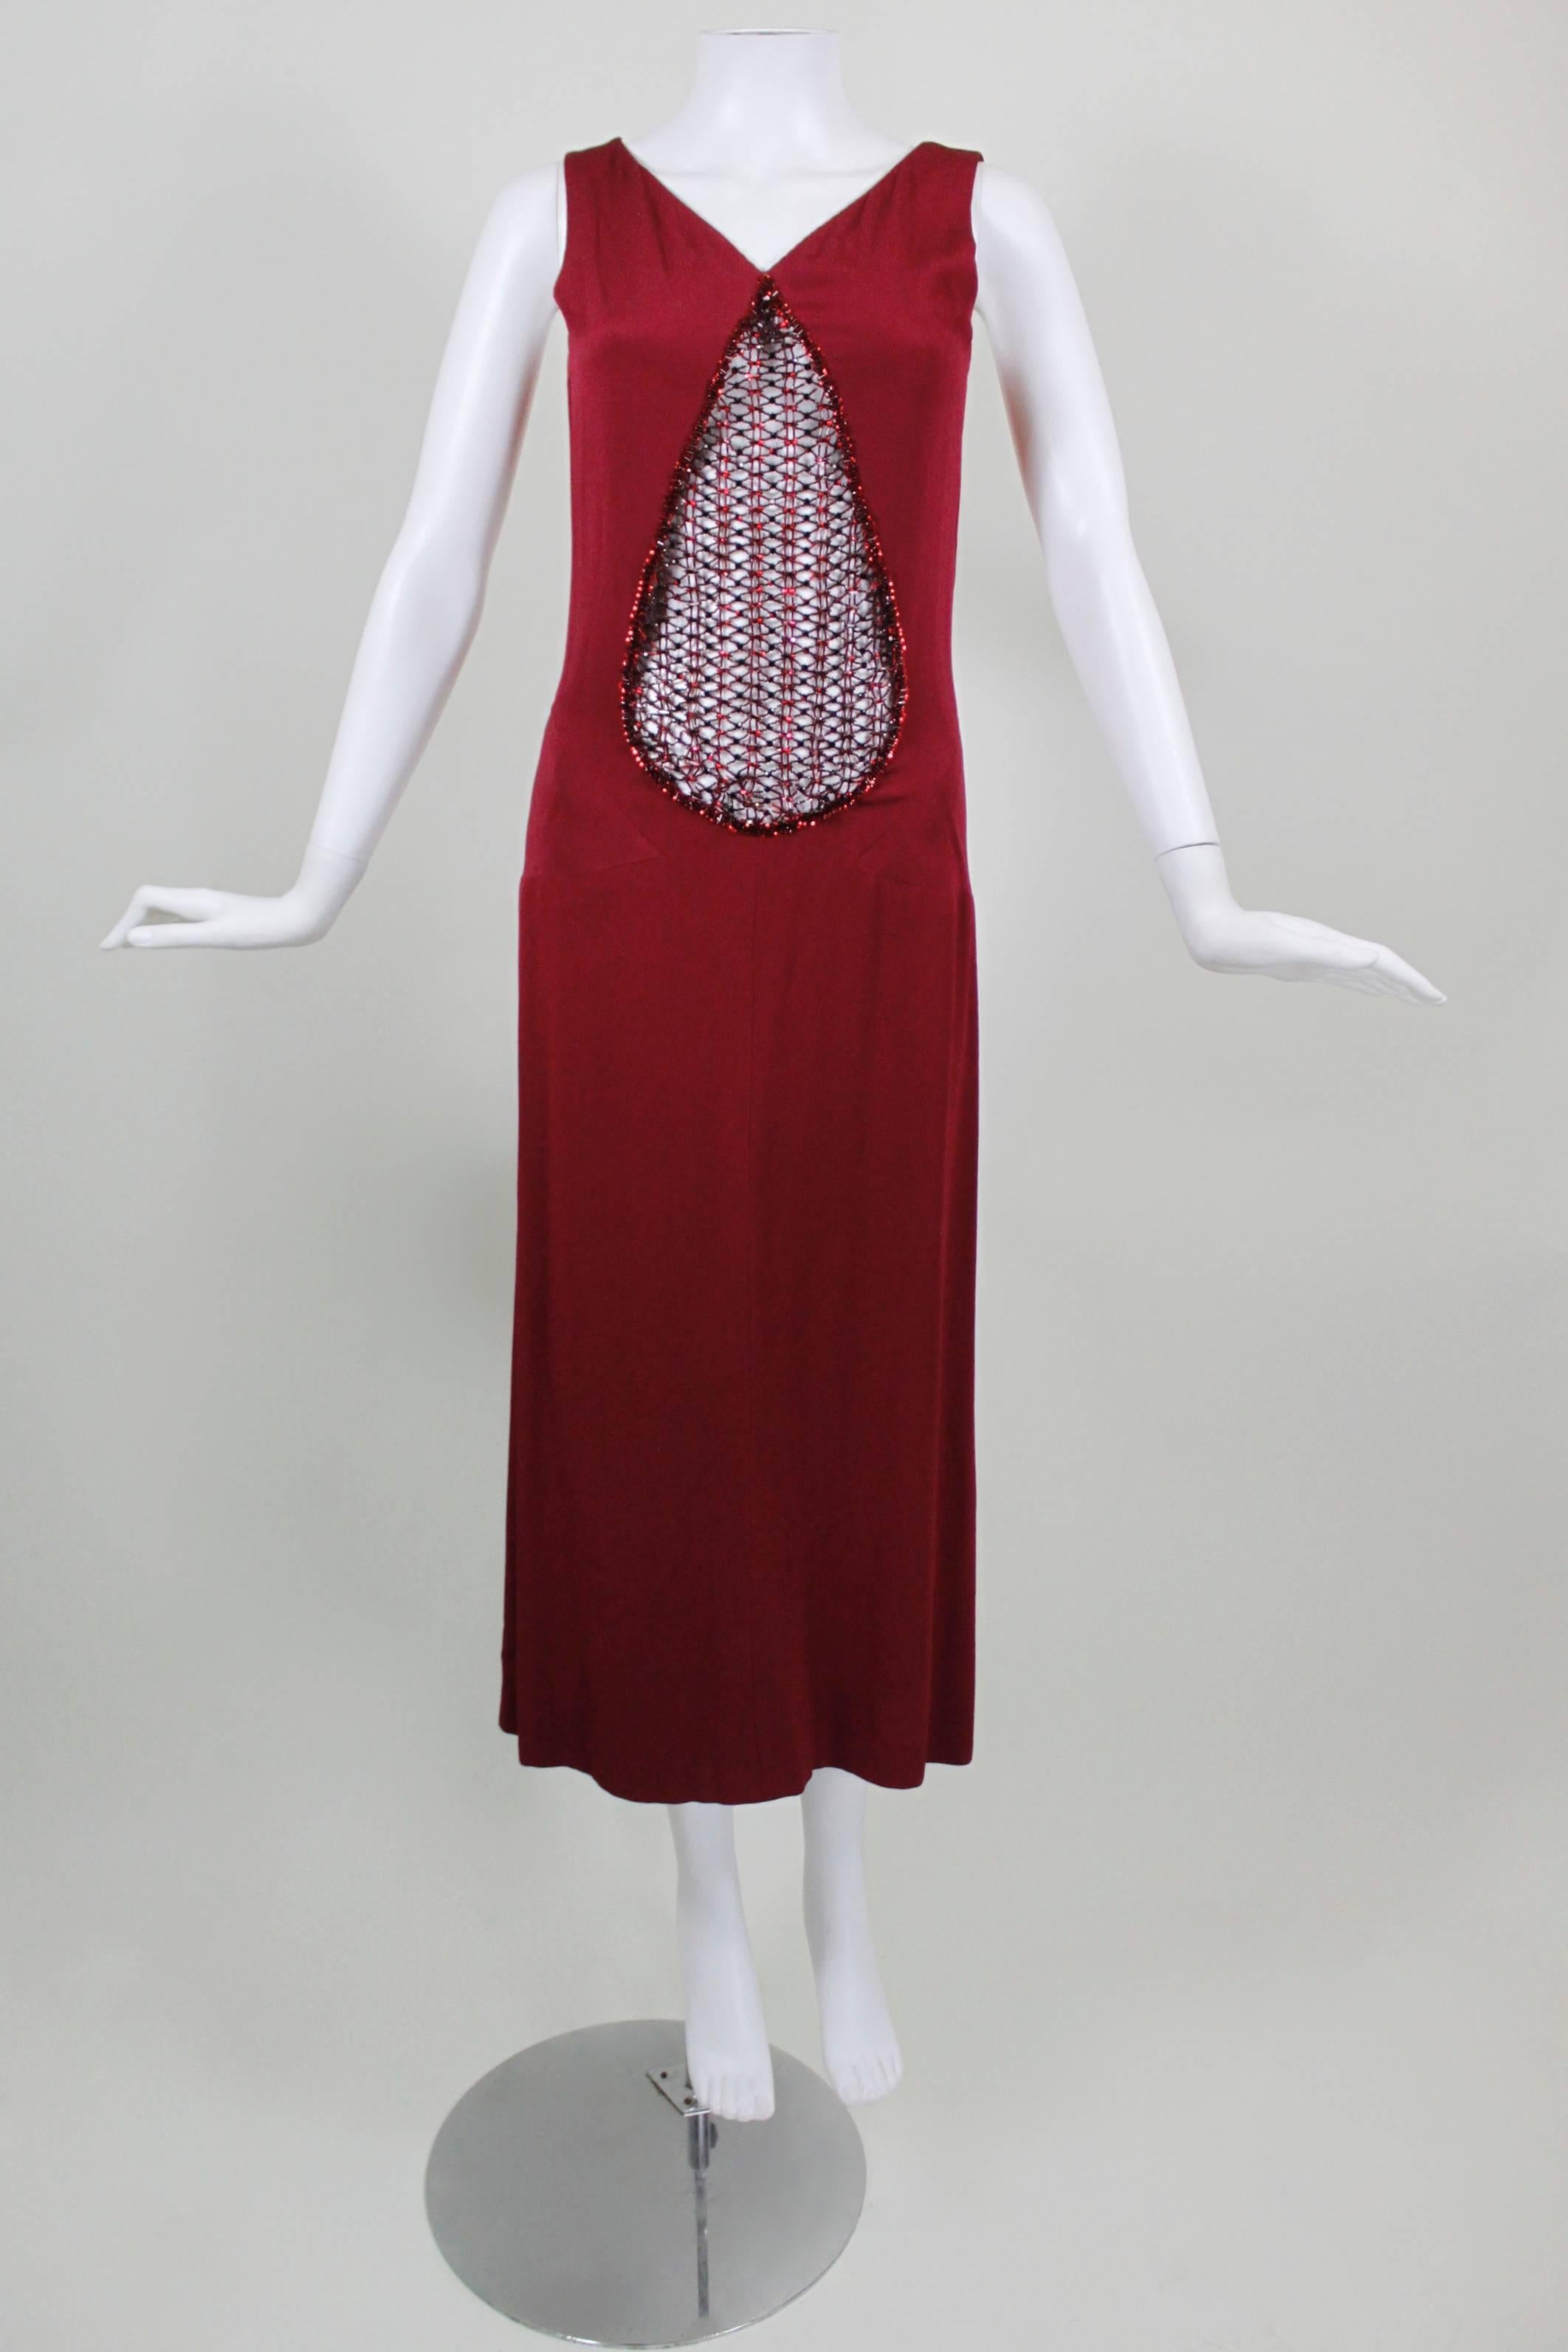 A stunning 1930s-inspired evening gown from Stop Sénès. This couture gown is done in raspberry red silk, is bias cut, and has a stunning drop-cutout covered with rhinestone and glass caged beading. 

-Scoop back
-Zips in